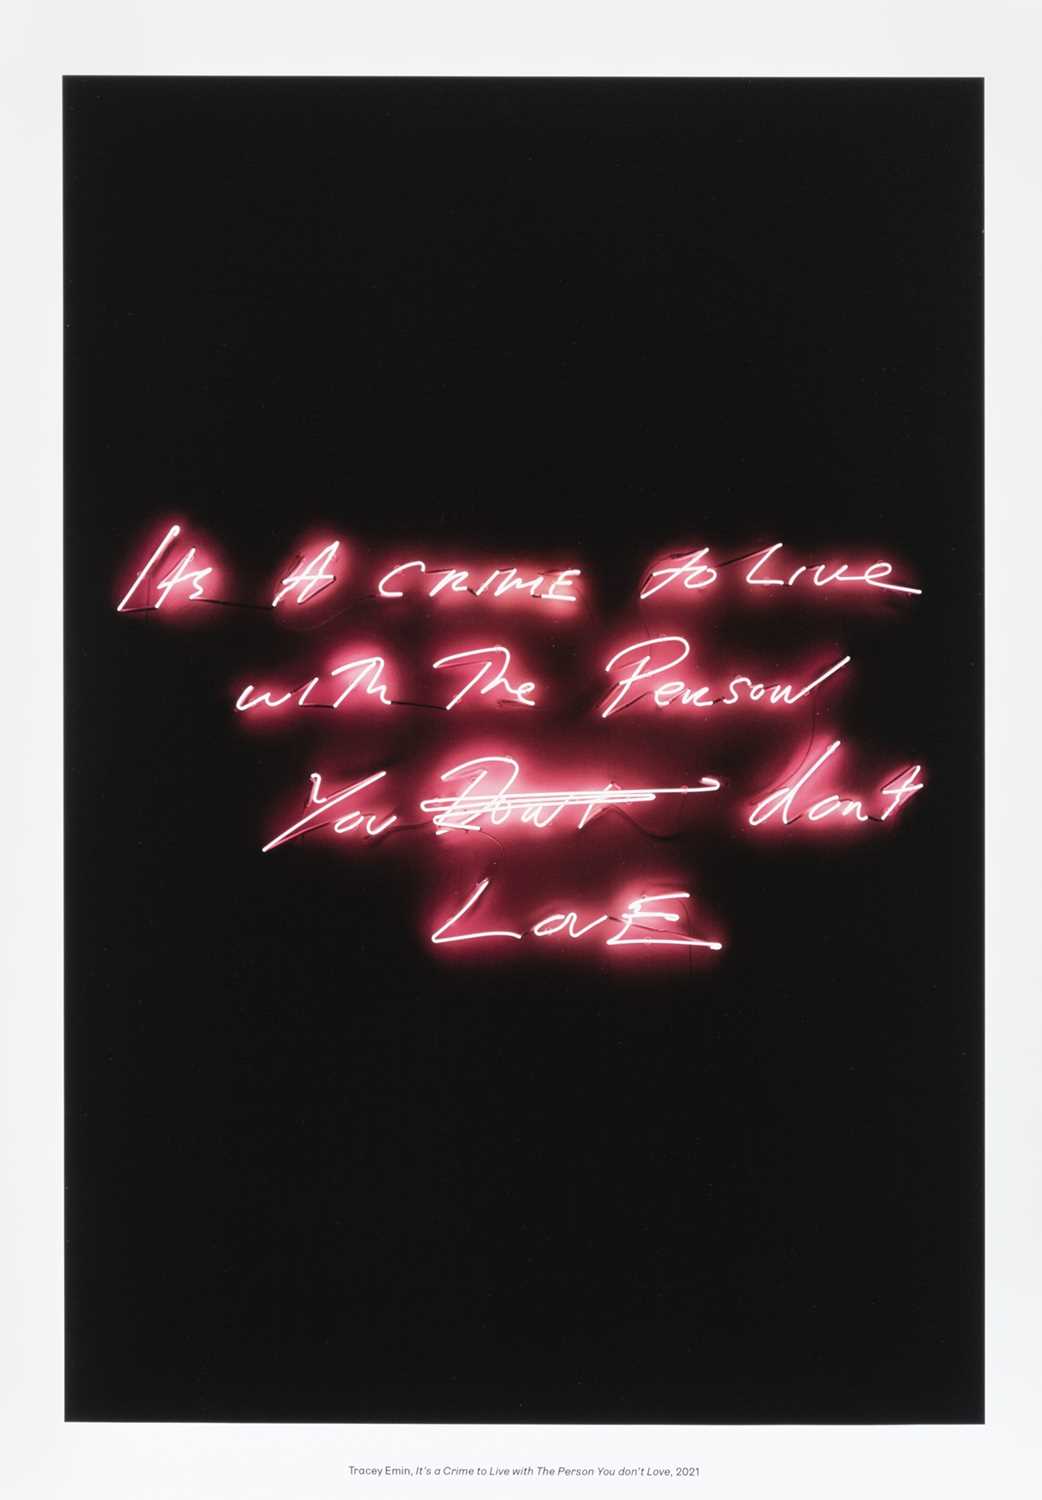 Lot 98 - Tracey Emin (British 1963-), 'It's A Crime To Live With The Person You Don't Love', 2021